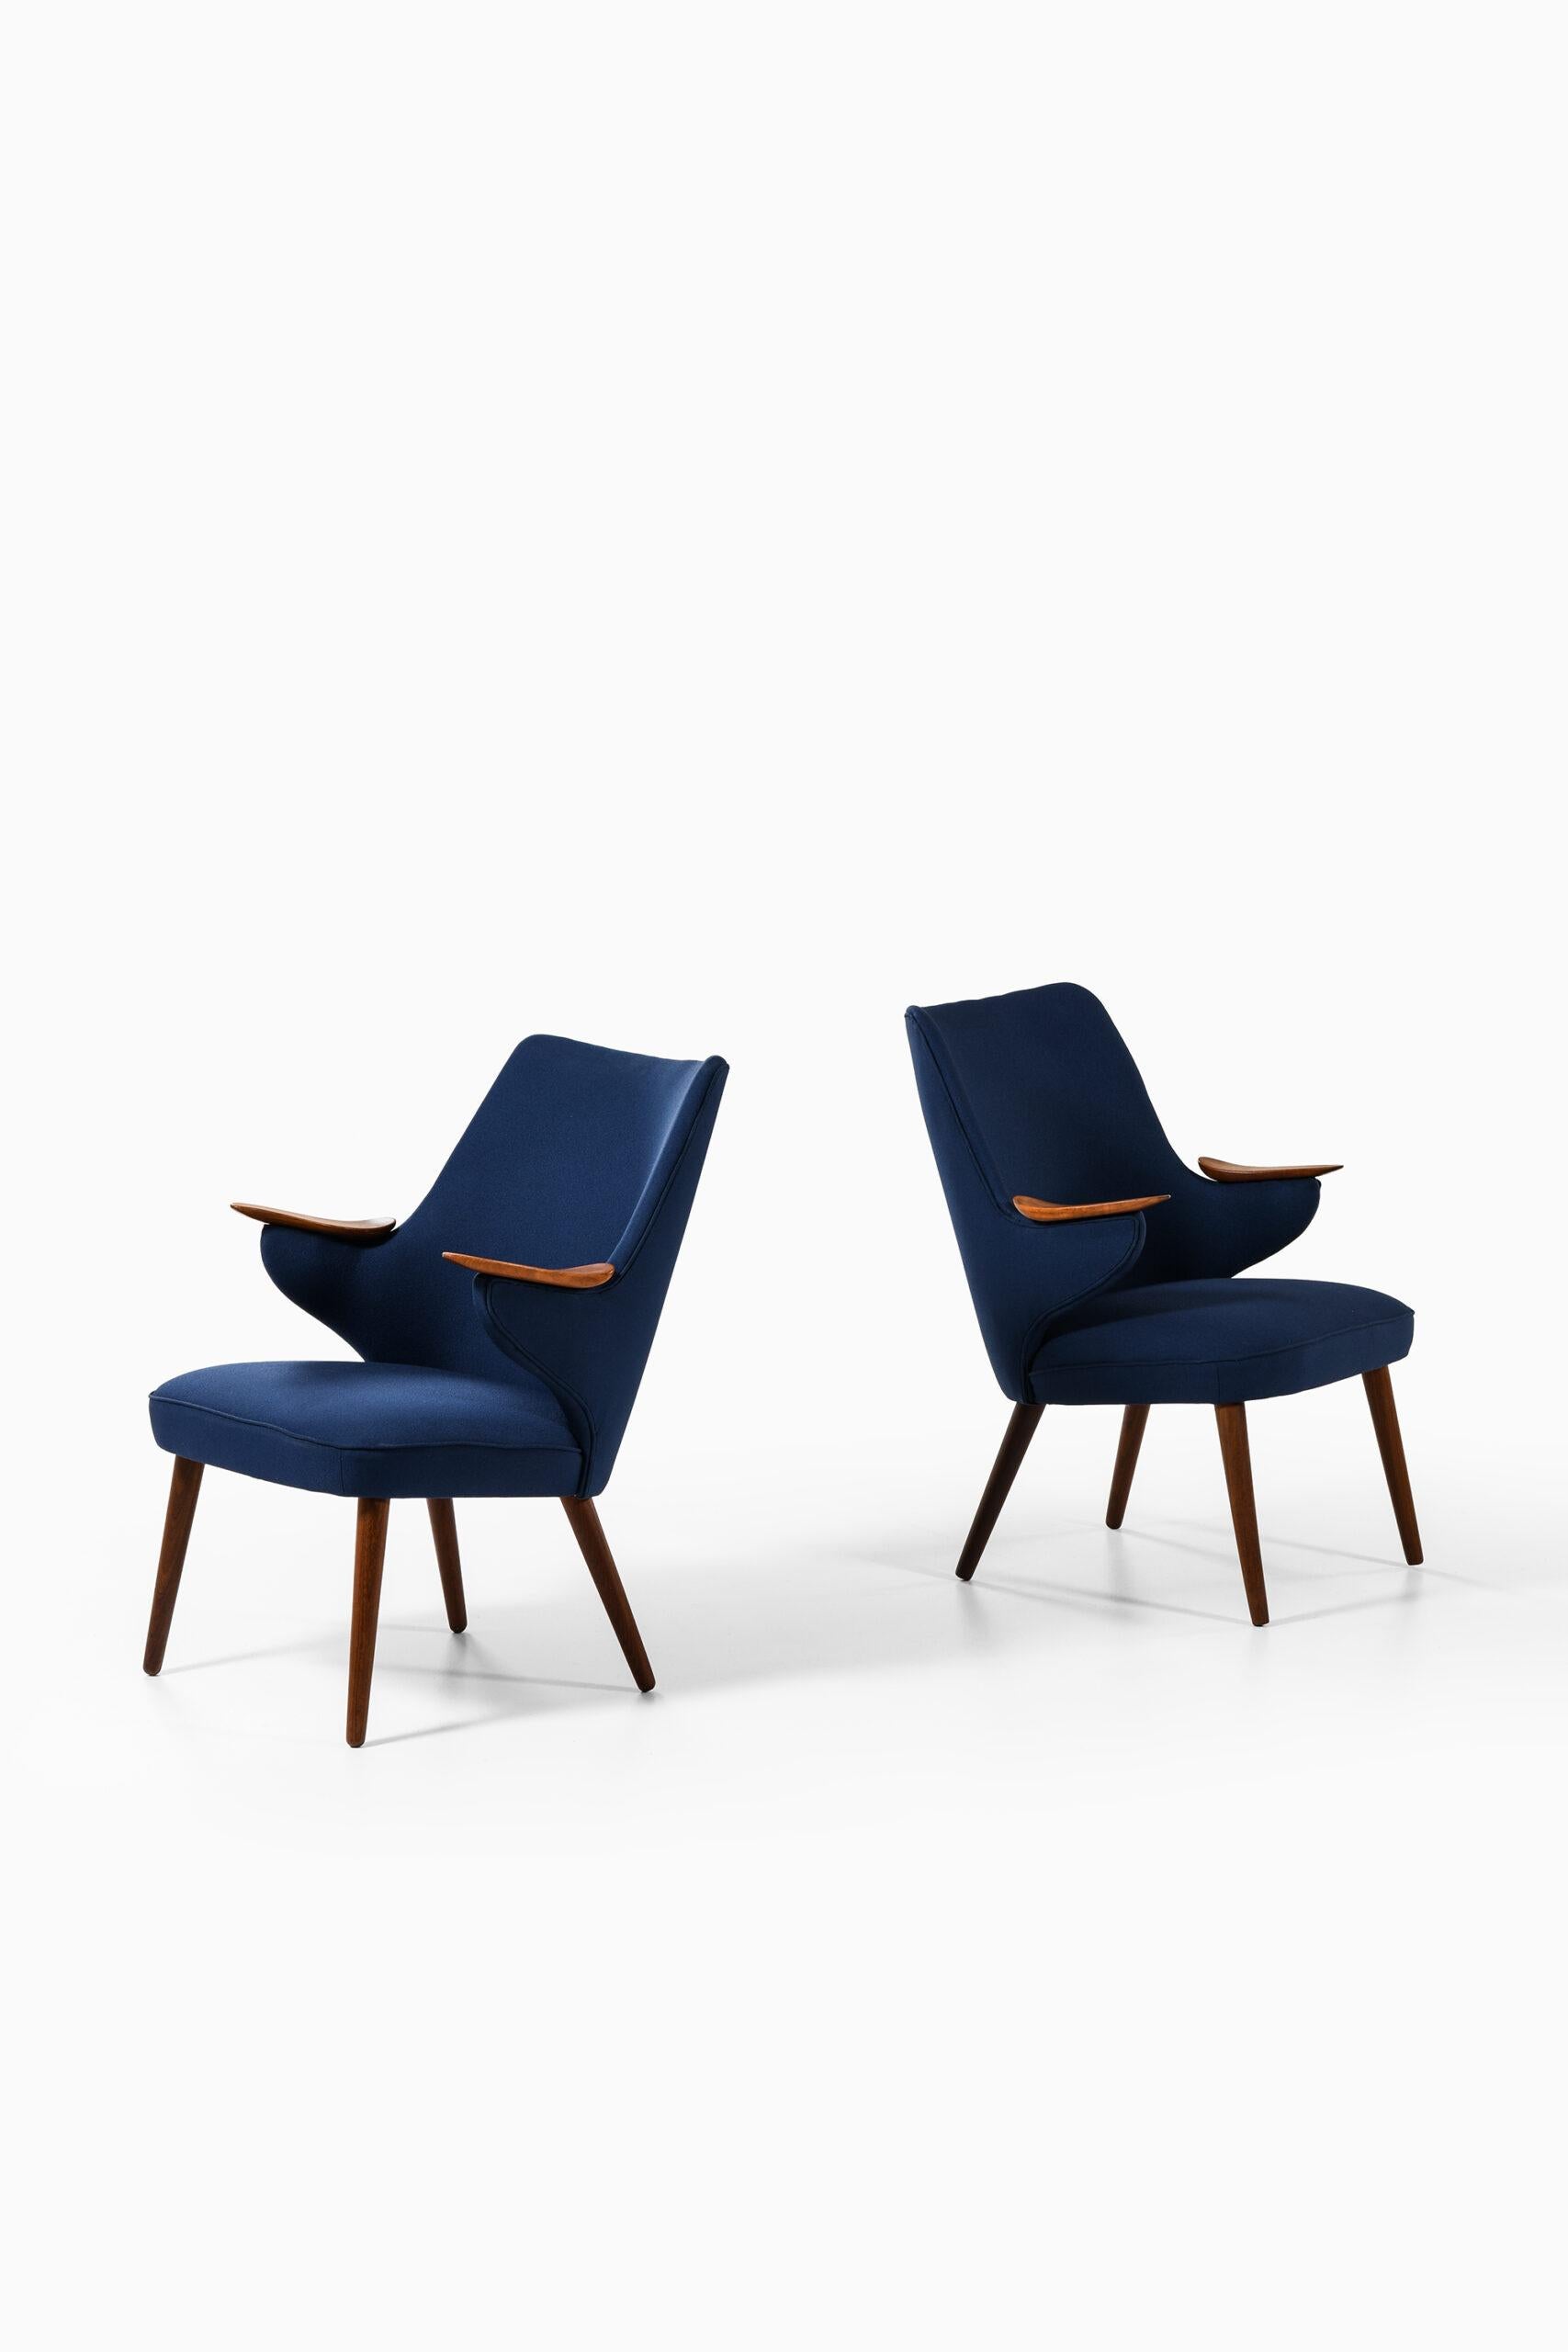 Mid-20th Century Erling Olsen Easy Chairs Produced by Erling Olsen Møbler For Sale